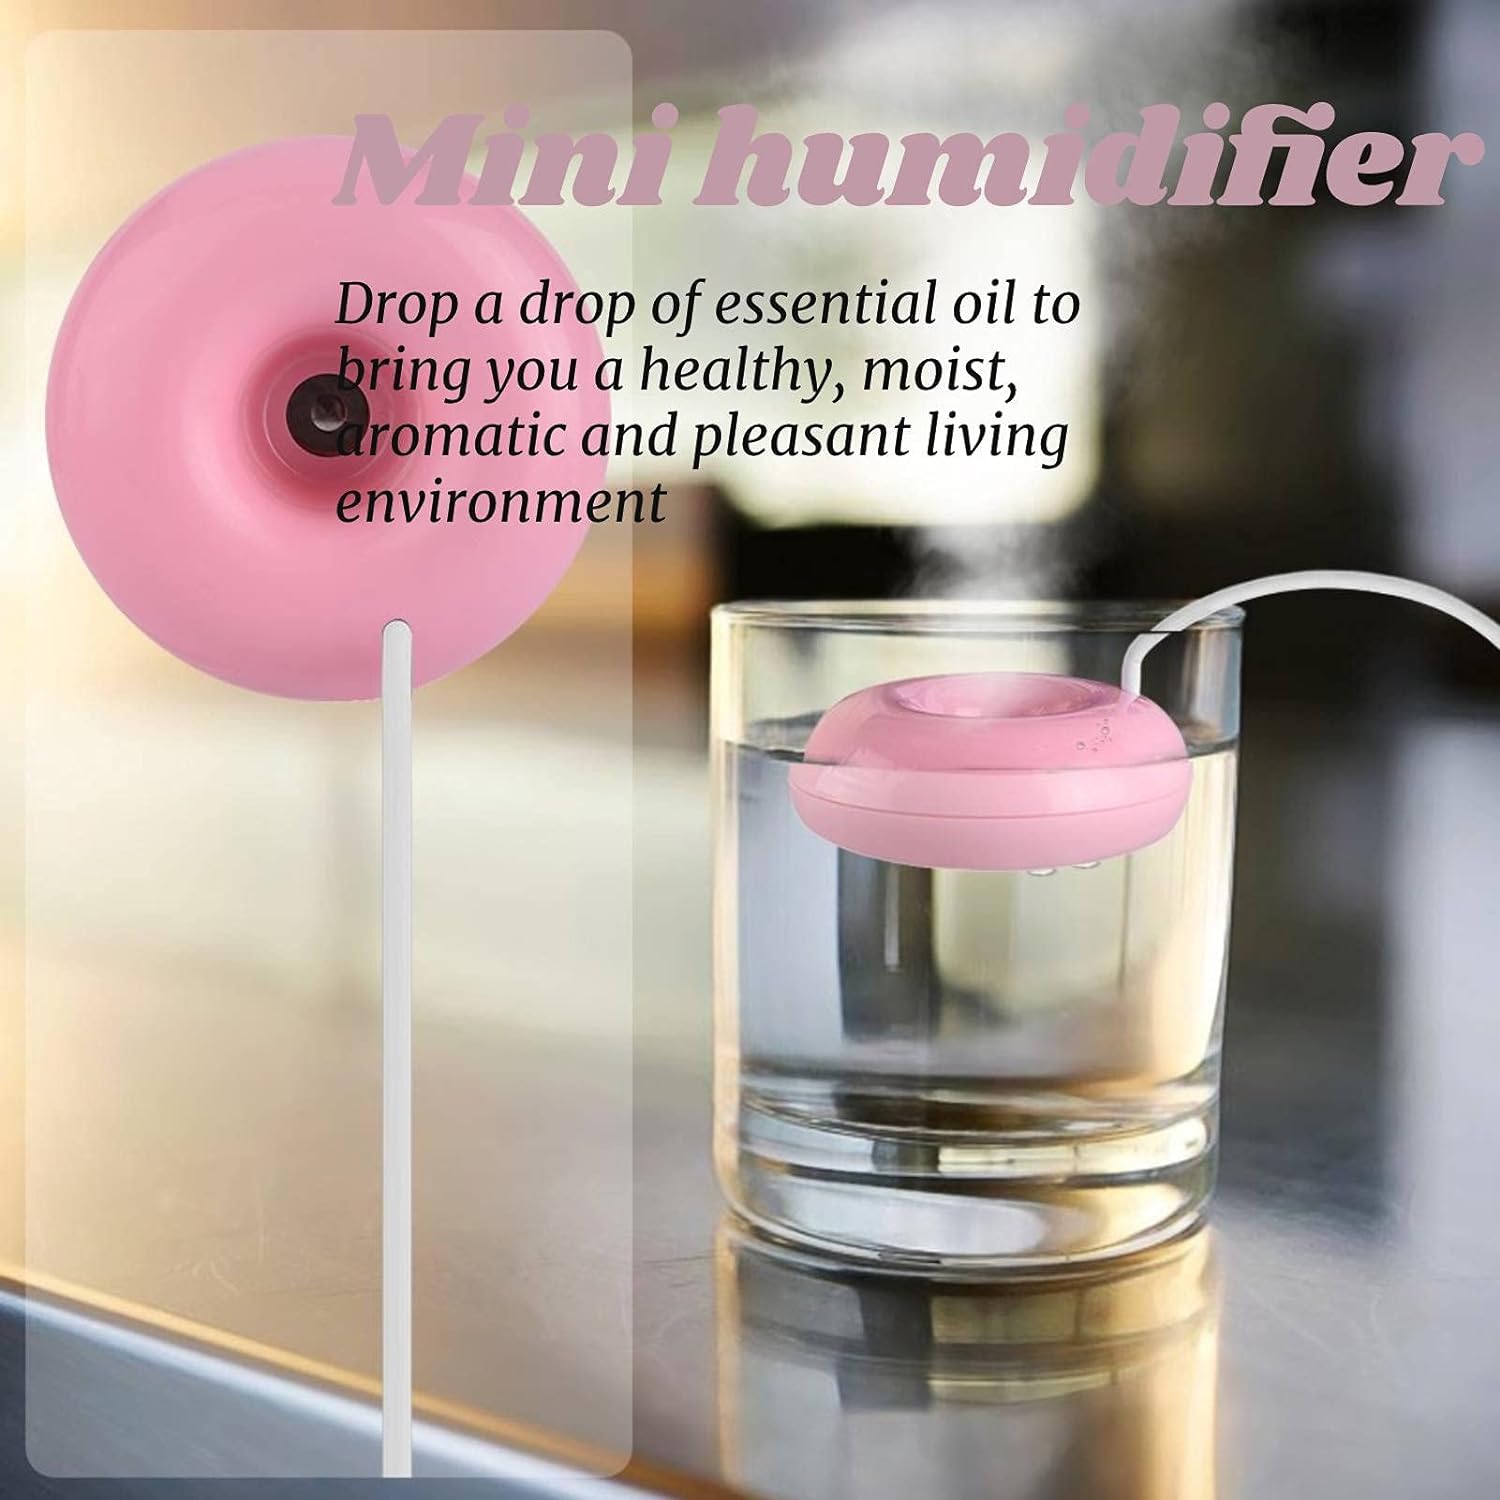 Mini Doughnut-Shaped Humidifier,Portable USB Powered Spray Humidifier,Atomization Spray Humidifier Floats On The Water for Home Bedroom Office Car,Outdoor Air Freshener,Aroma Diffuser